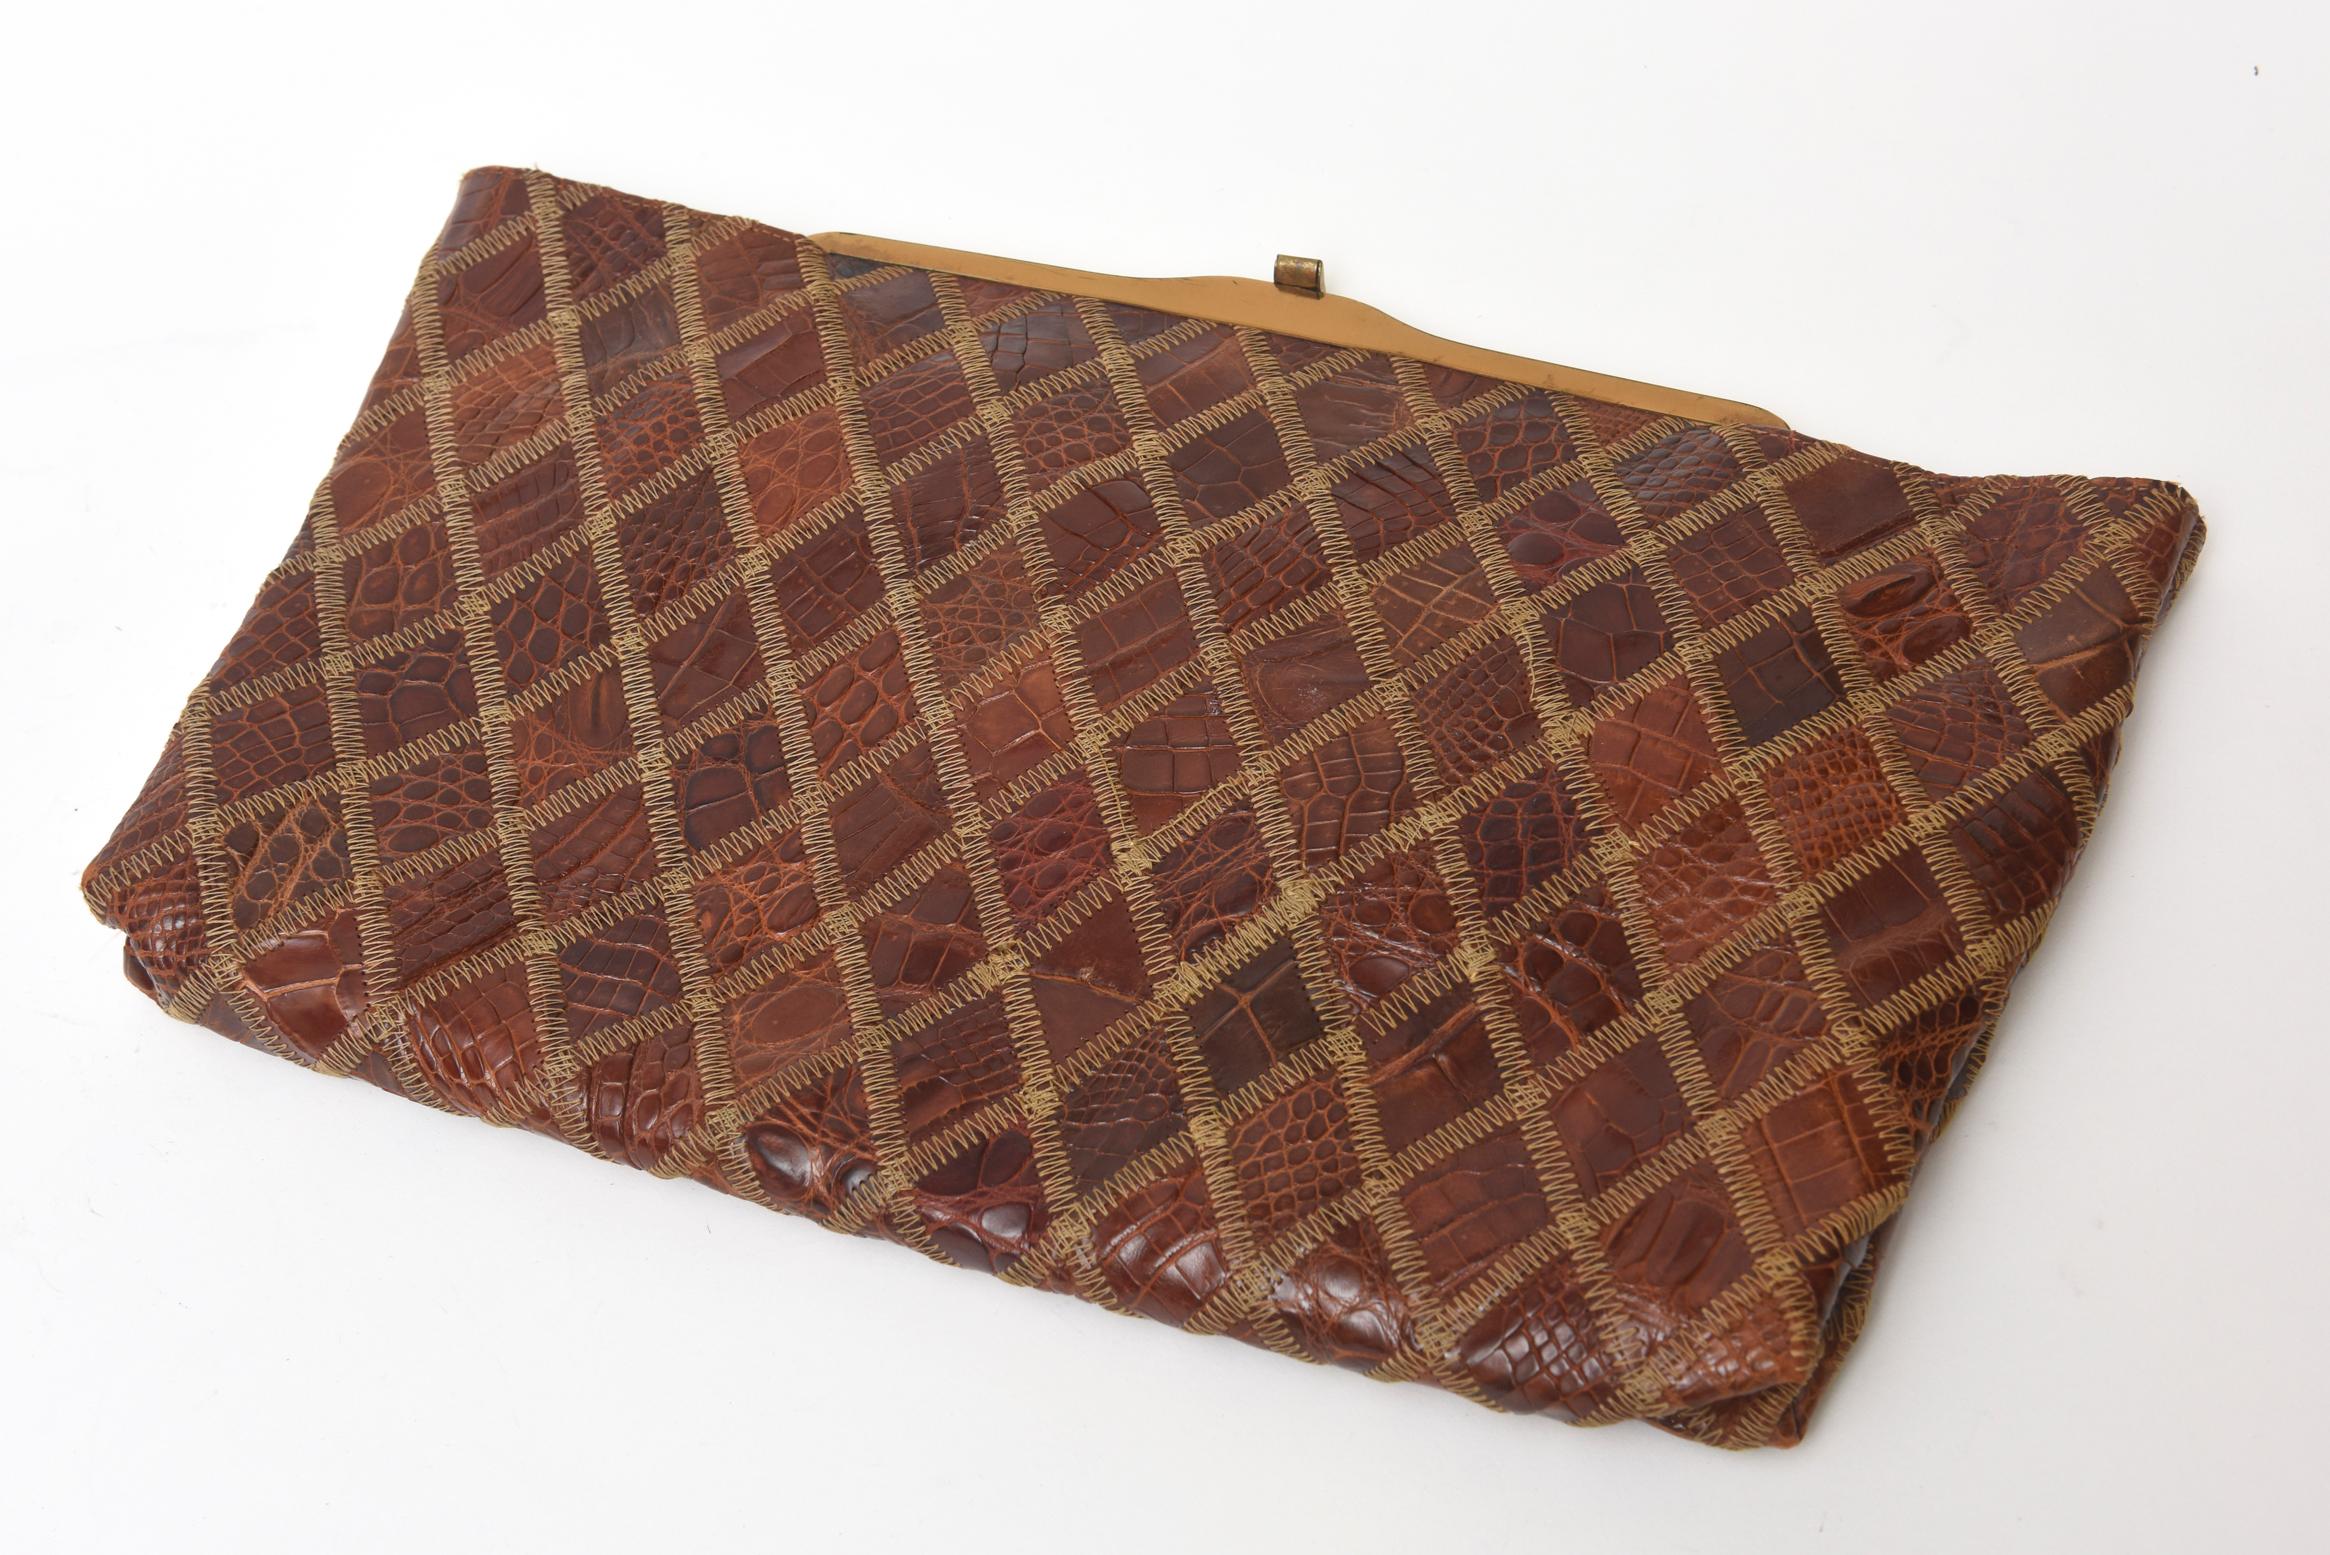 This lovely mid century modern diamond patterned alligator clutch has gold toned hardware and closure. The  different tones of brown supple alligator leather make this textural with it's top stitching. It has an enclosure of  a small coin purse and